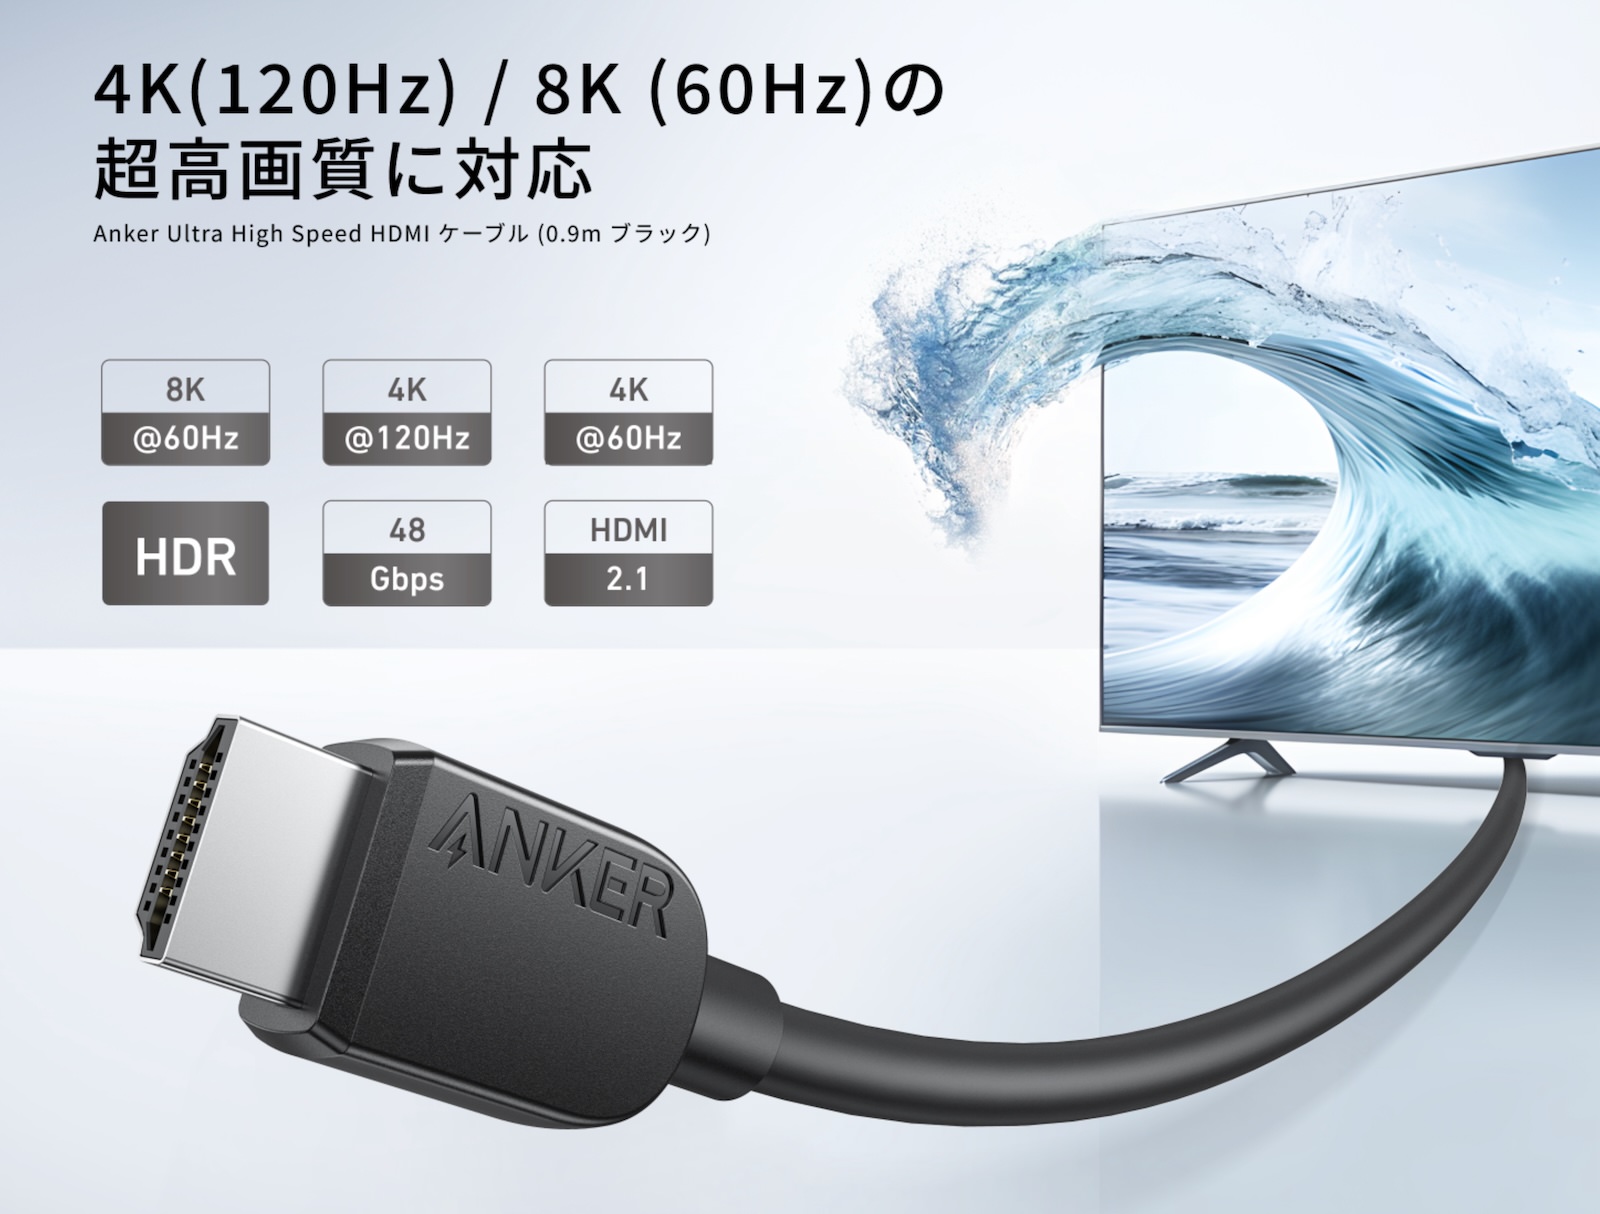 Anker new 4k 8k cable